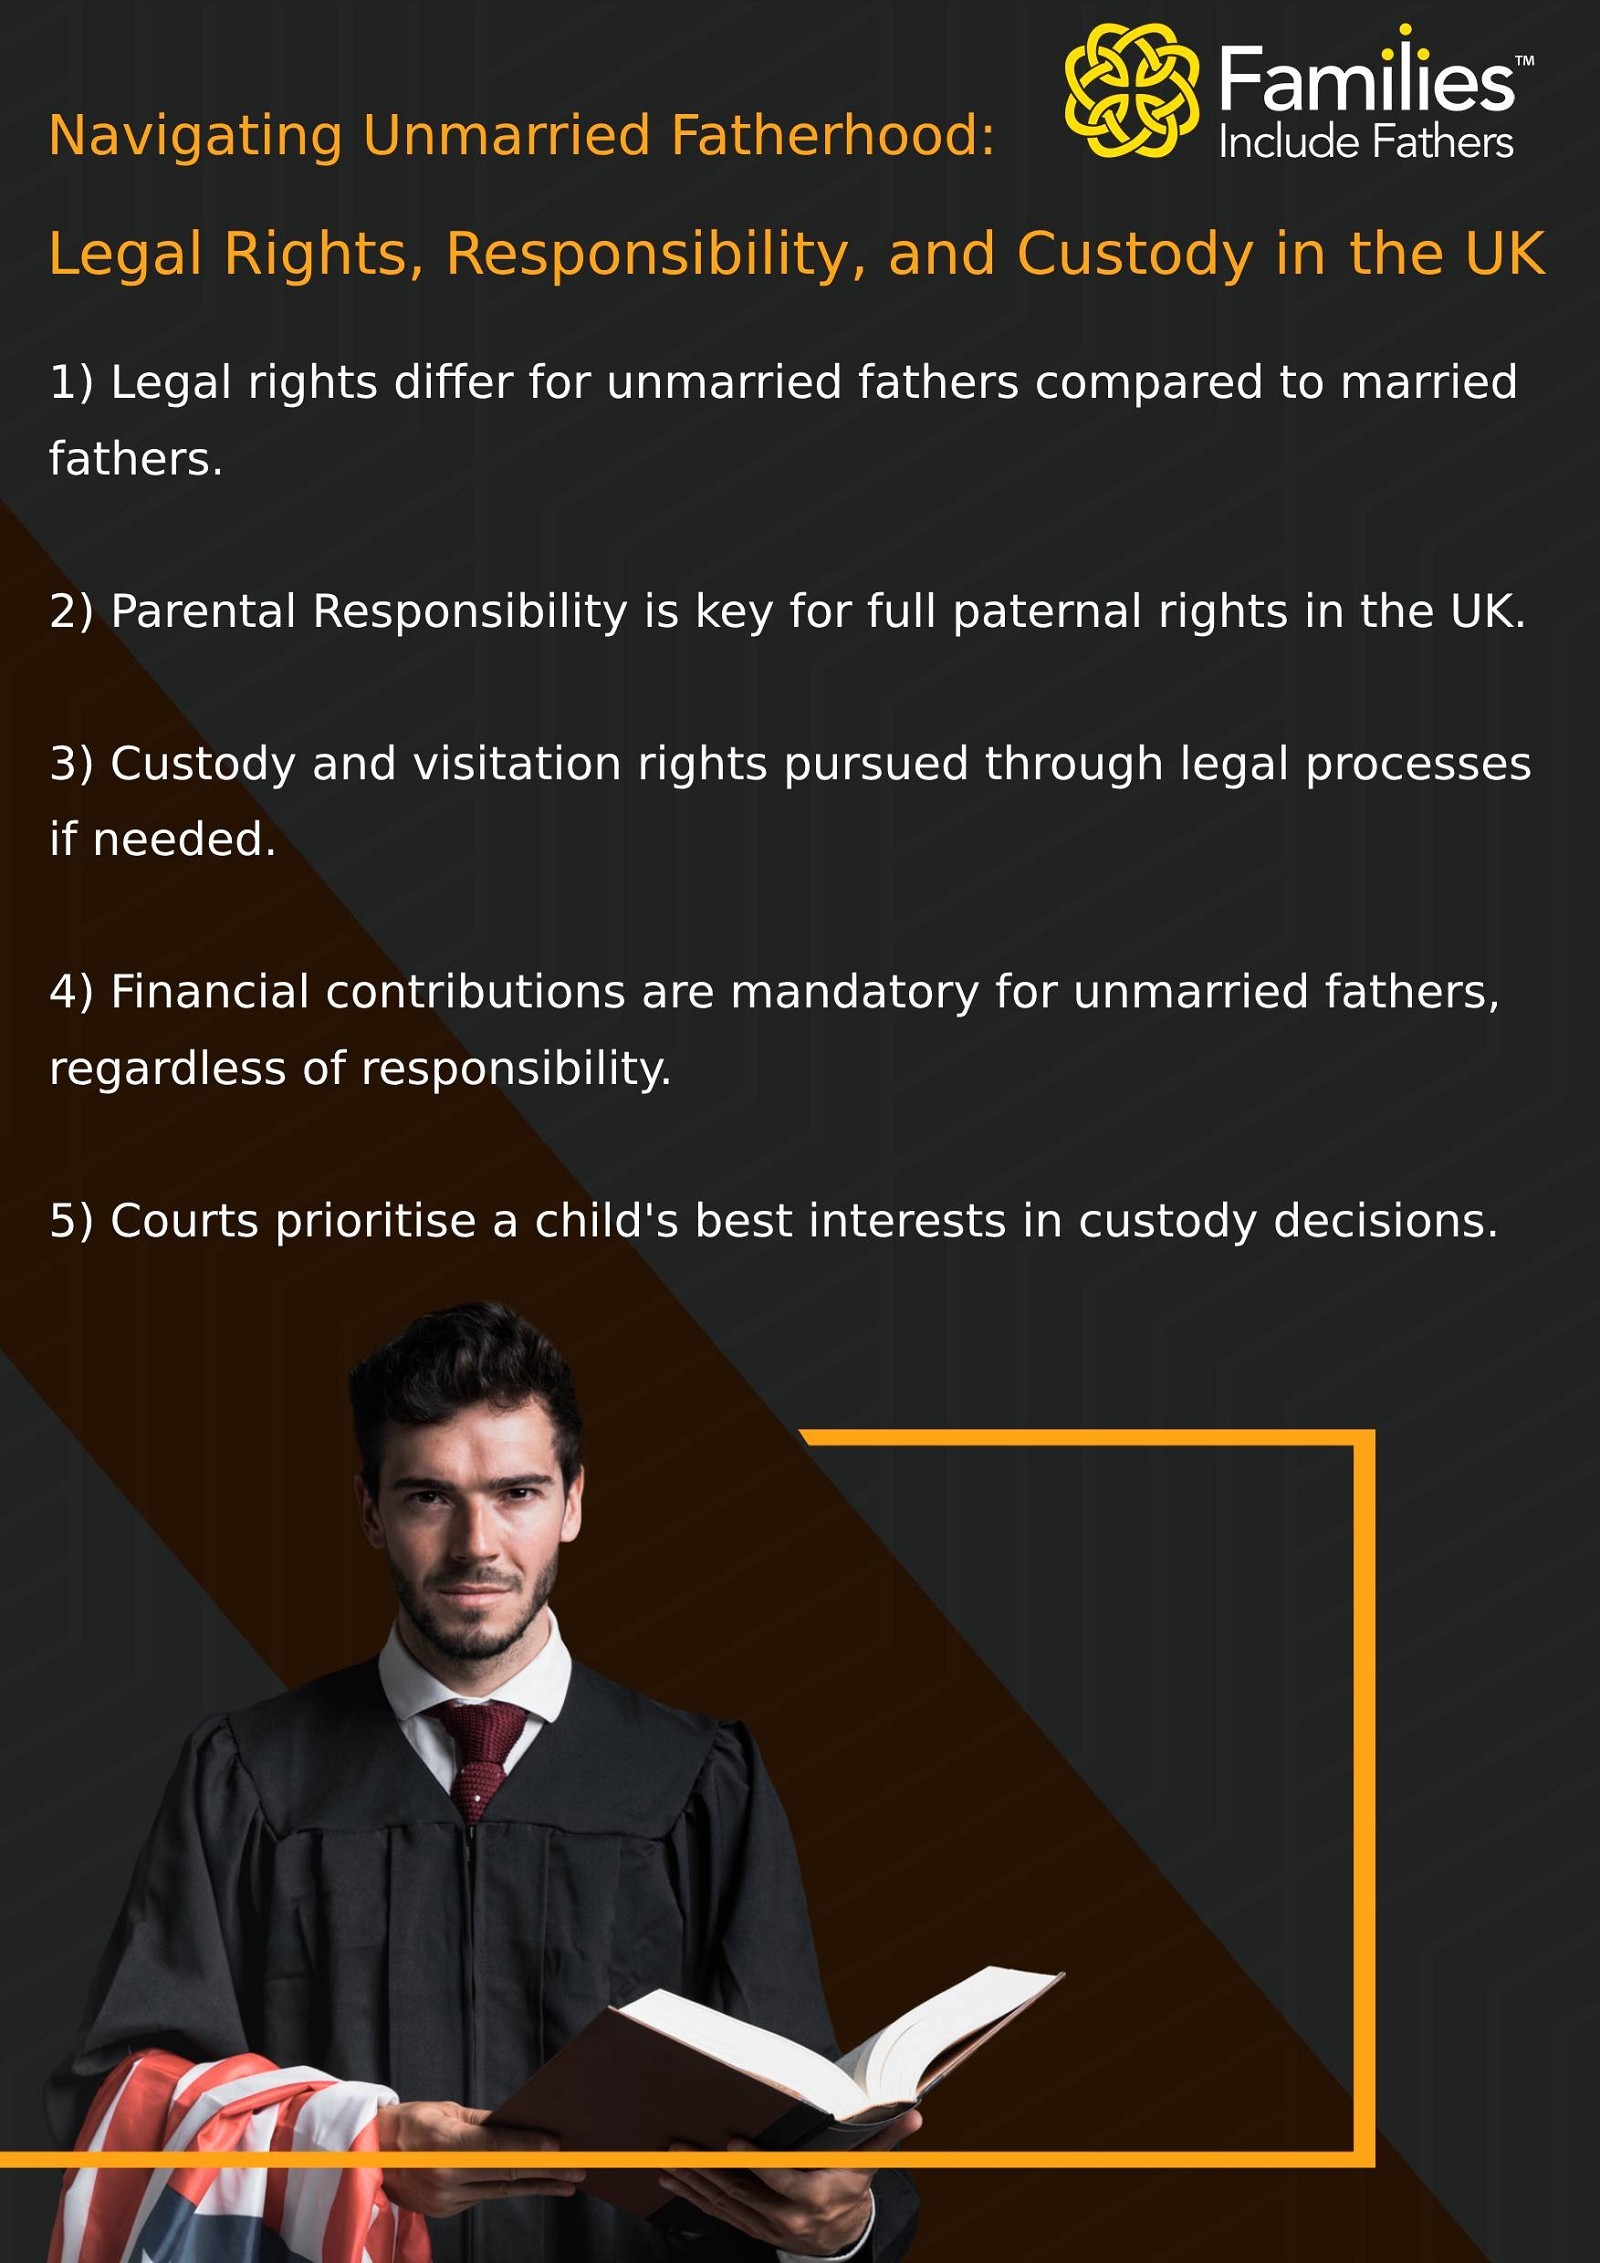 Navigating Unmarried Fatherhood: Legal Rights, Responsibility, and Custody in the UK